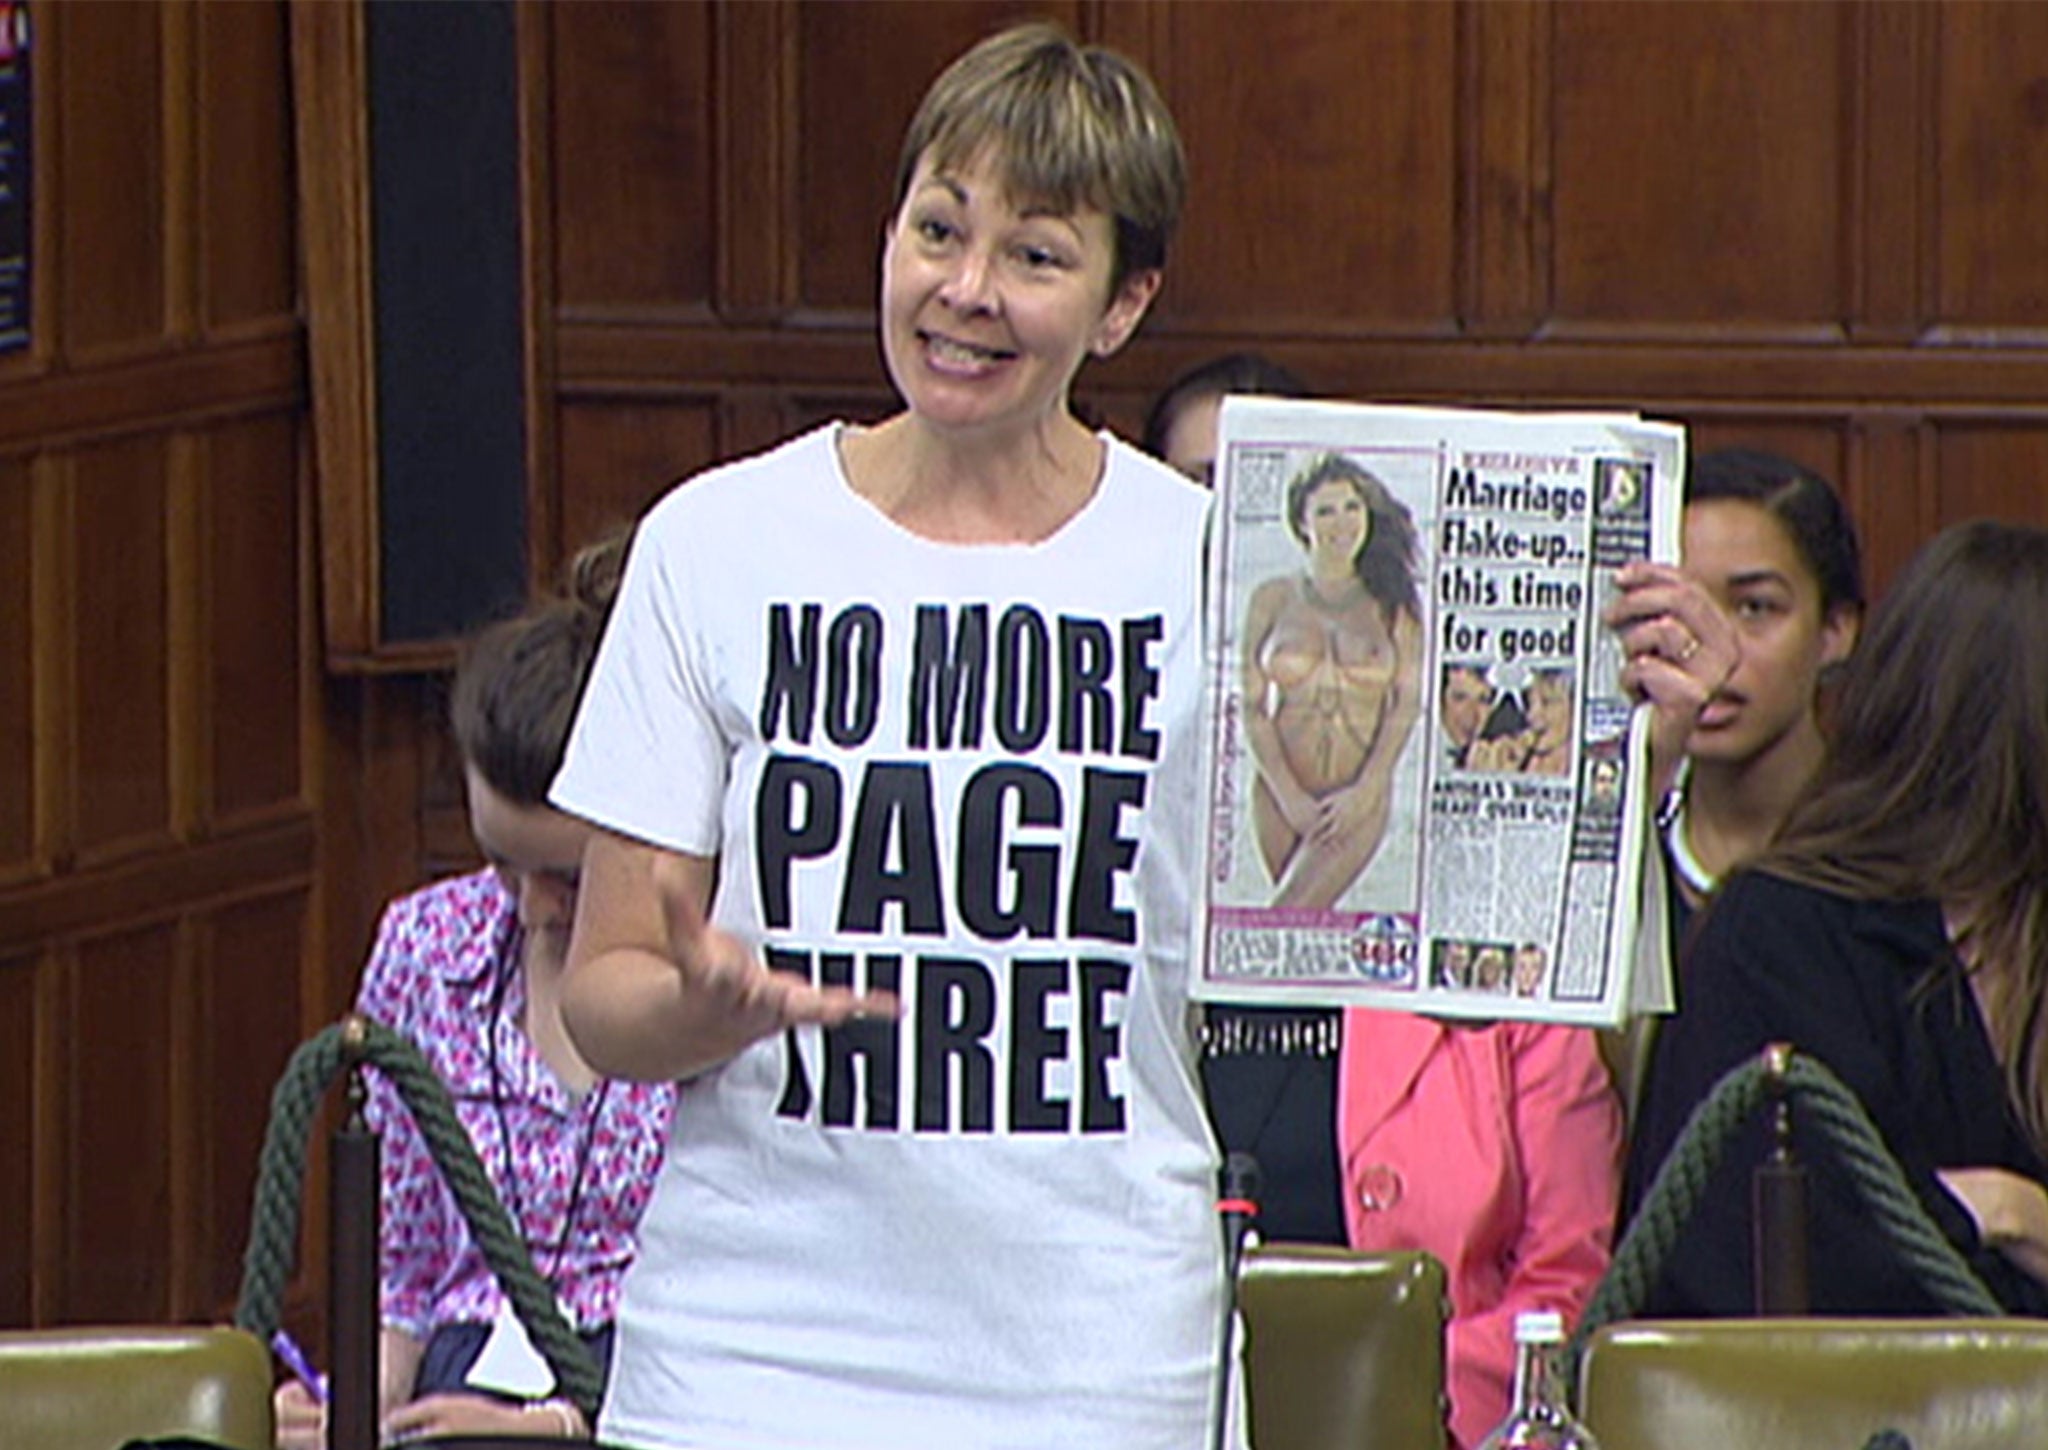 The author protests Page 3 during a Commons debate